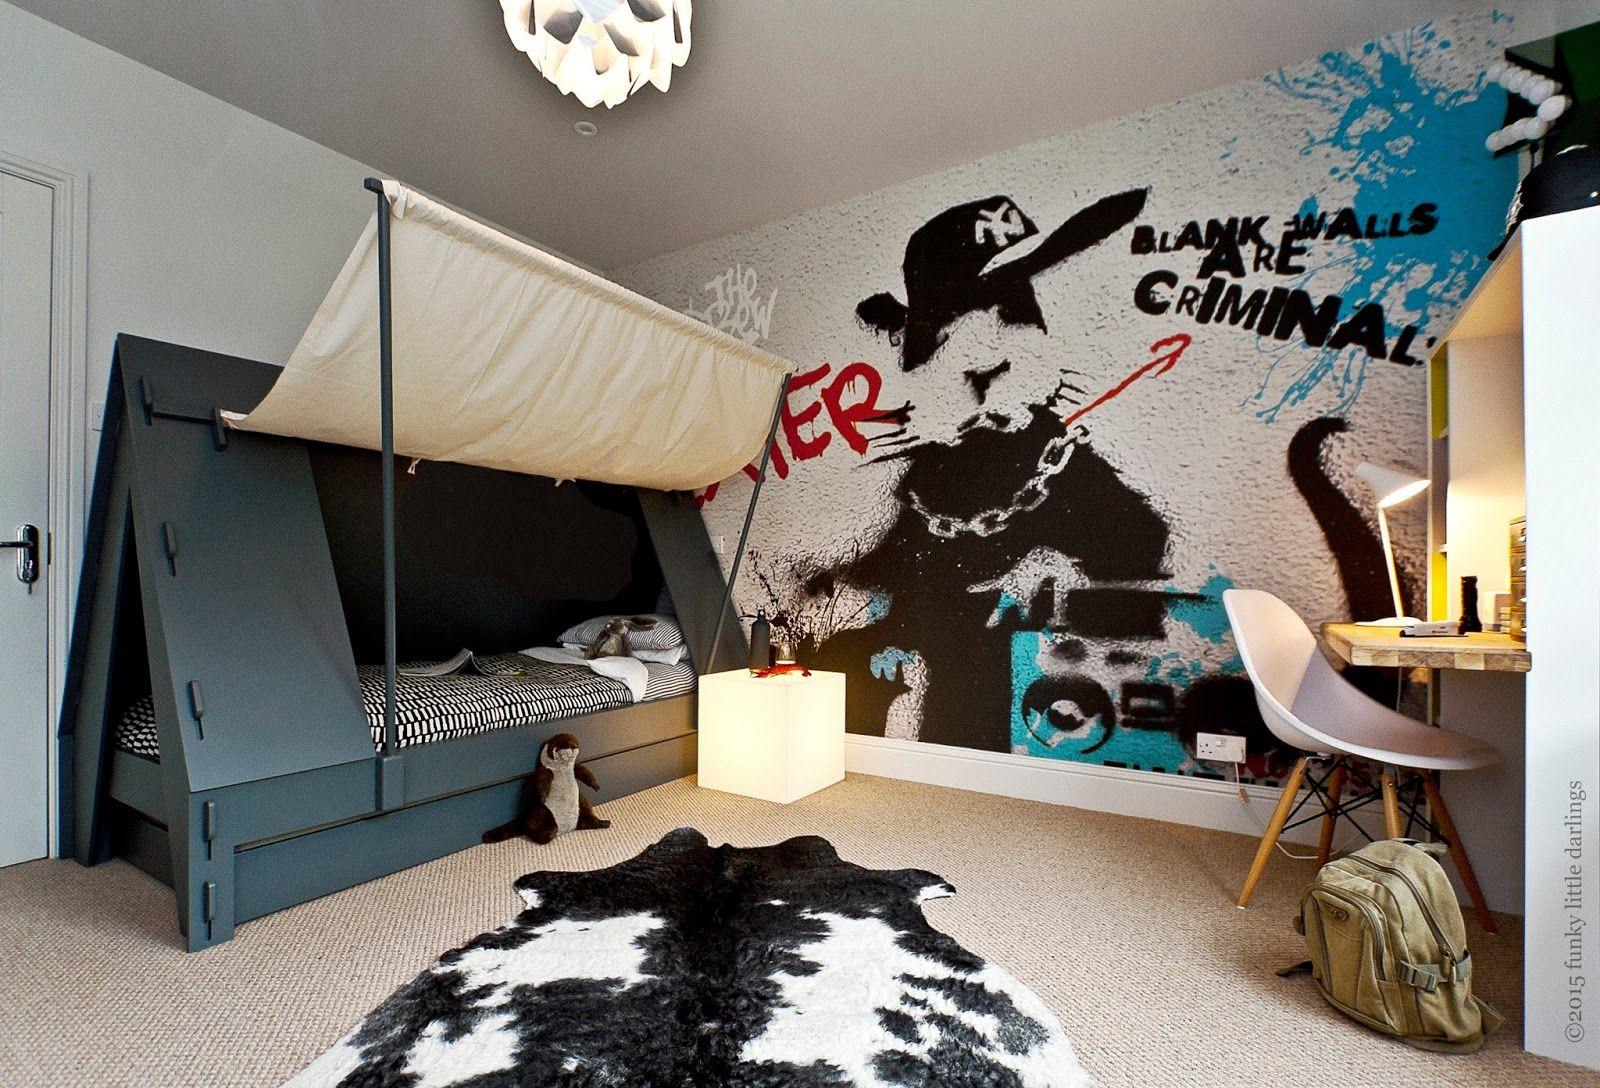 Funky Little Darlings.blog: Tent bed and graffiti wallpaper for cool